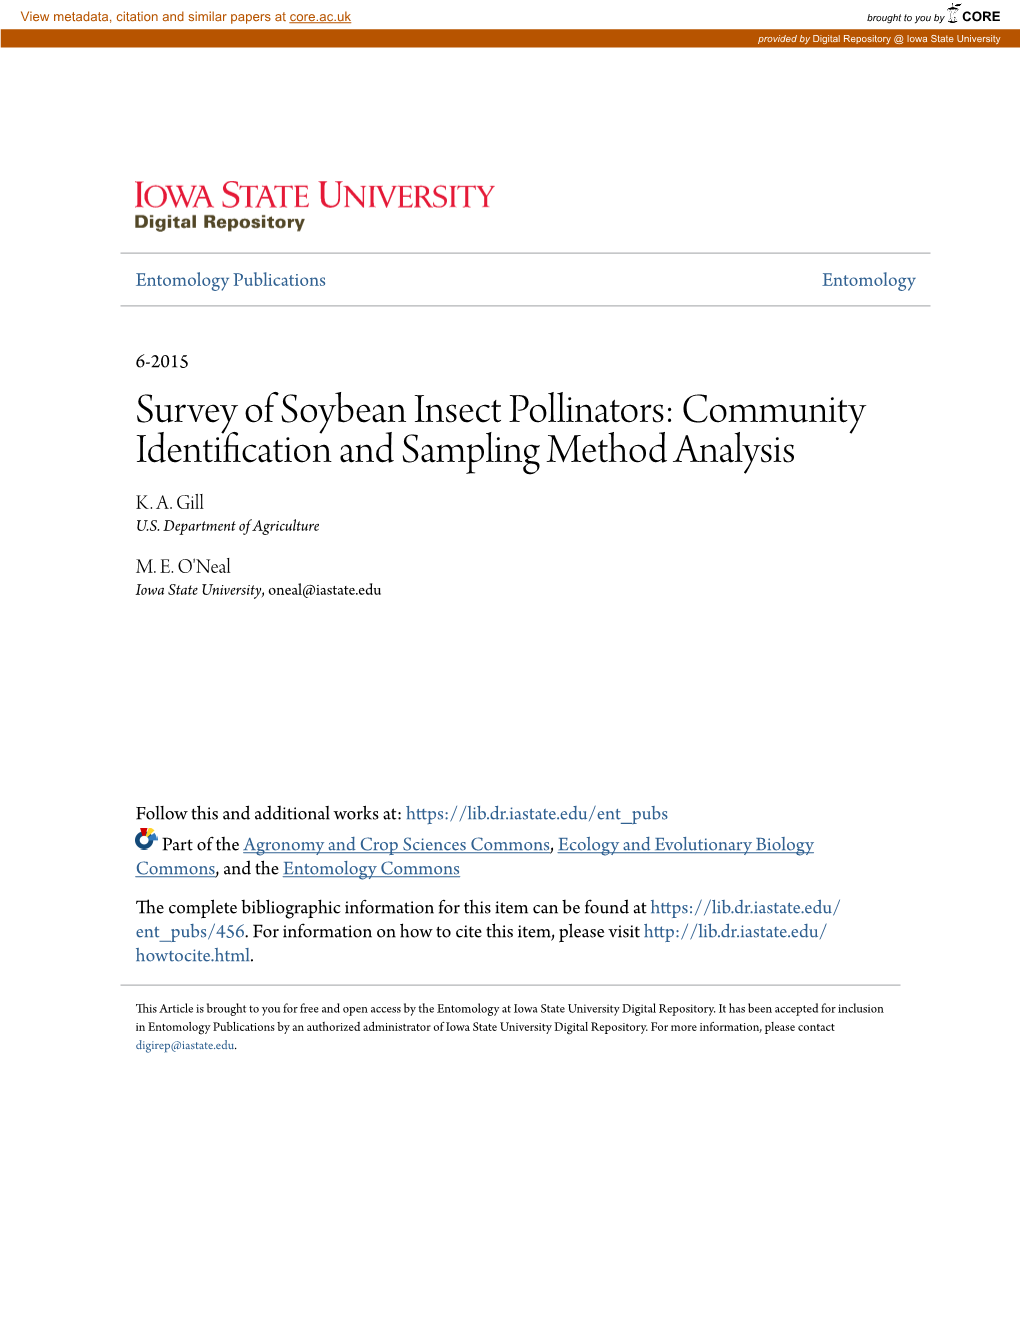 Survey of Soybean Insect Pollinators: Community Identification and Sampling Method Analysis K